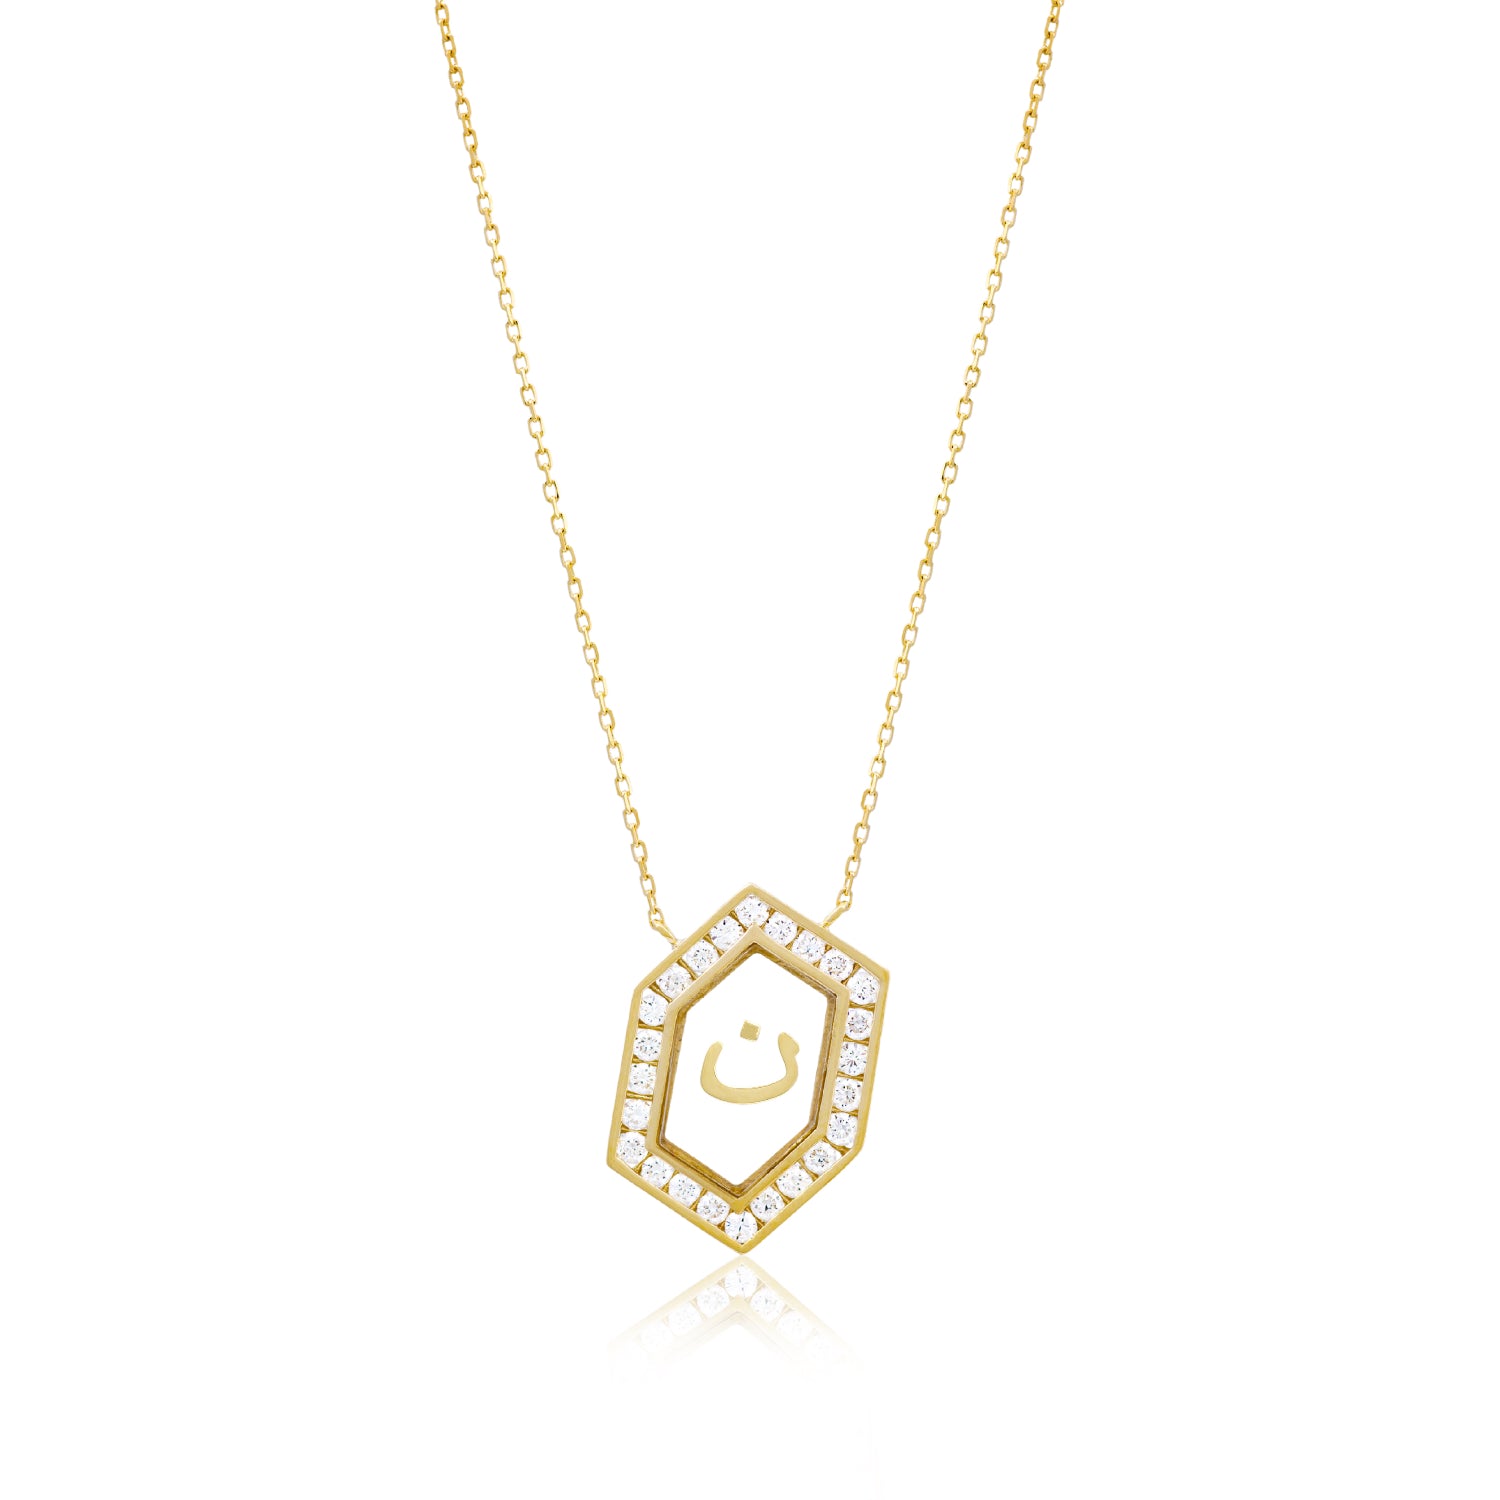 Qamoos 1.0 Letter ن Diamond Necklace in Yellow Gold